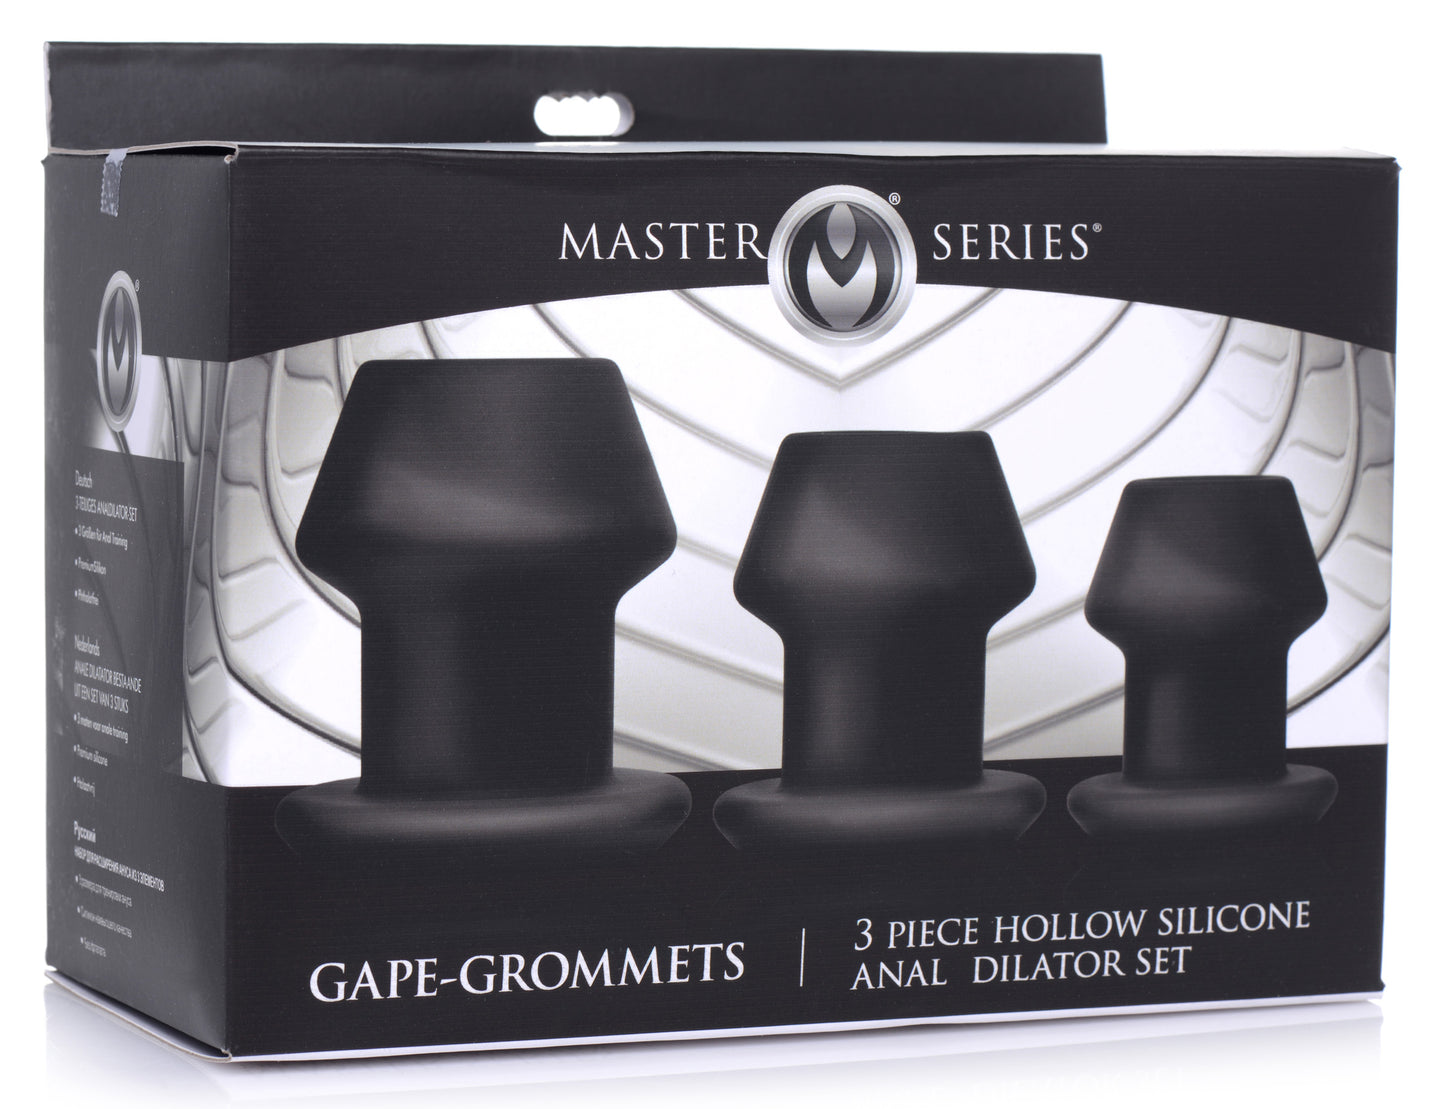 Gape-grommets 3 Piece Hollow Silicone Anal Dilator Set